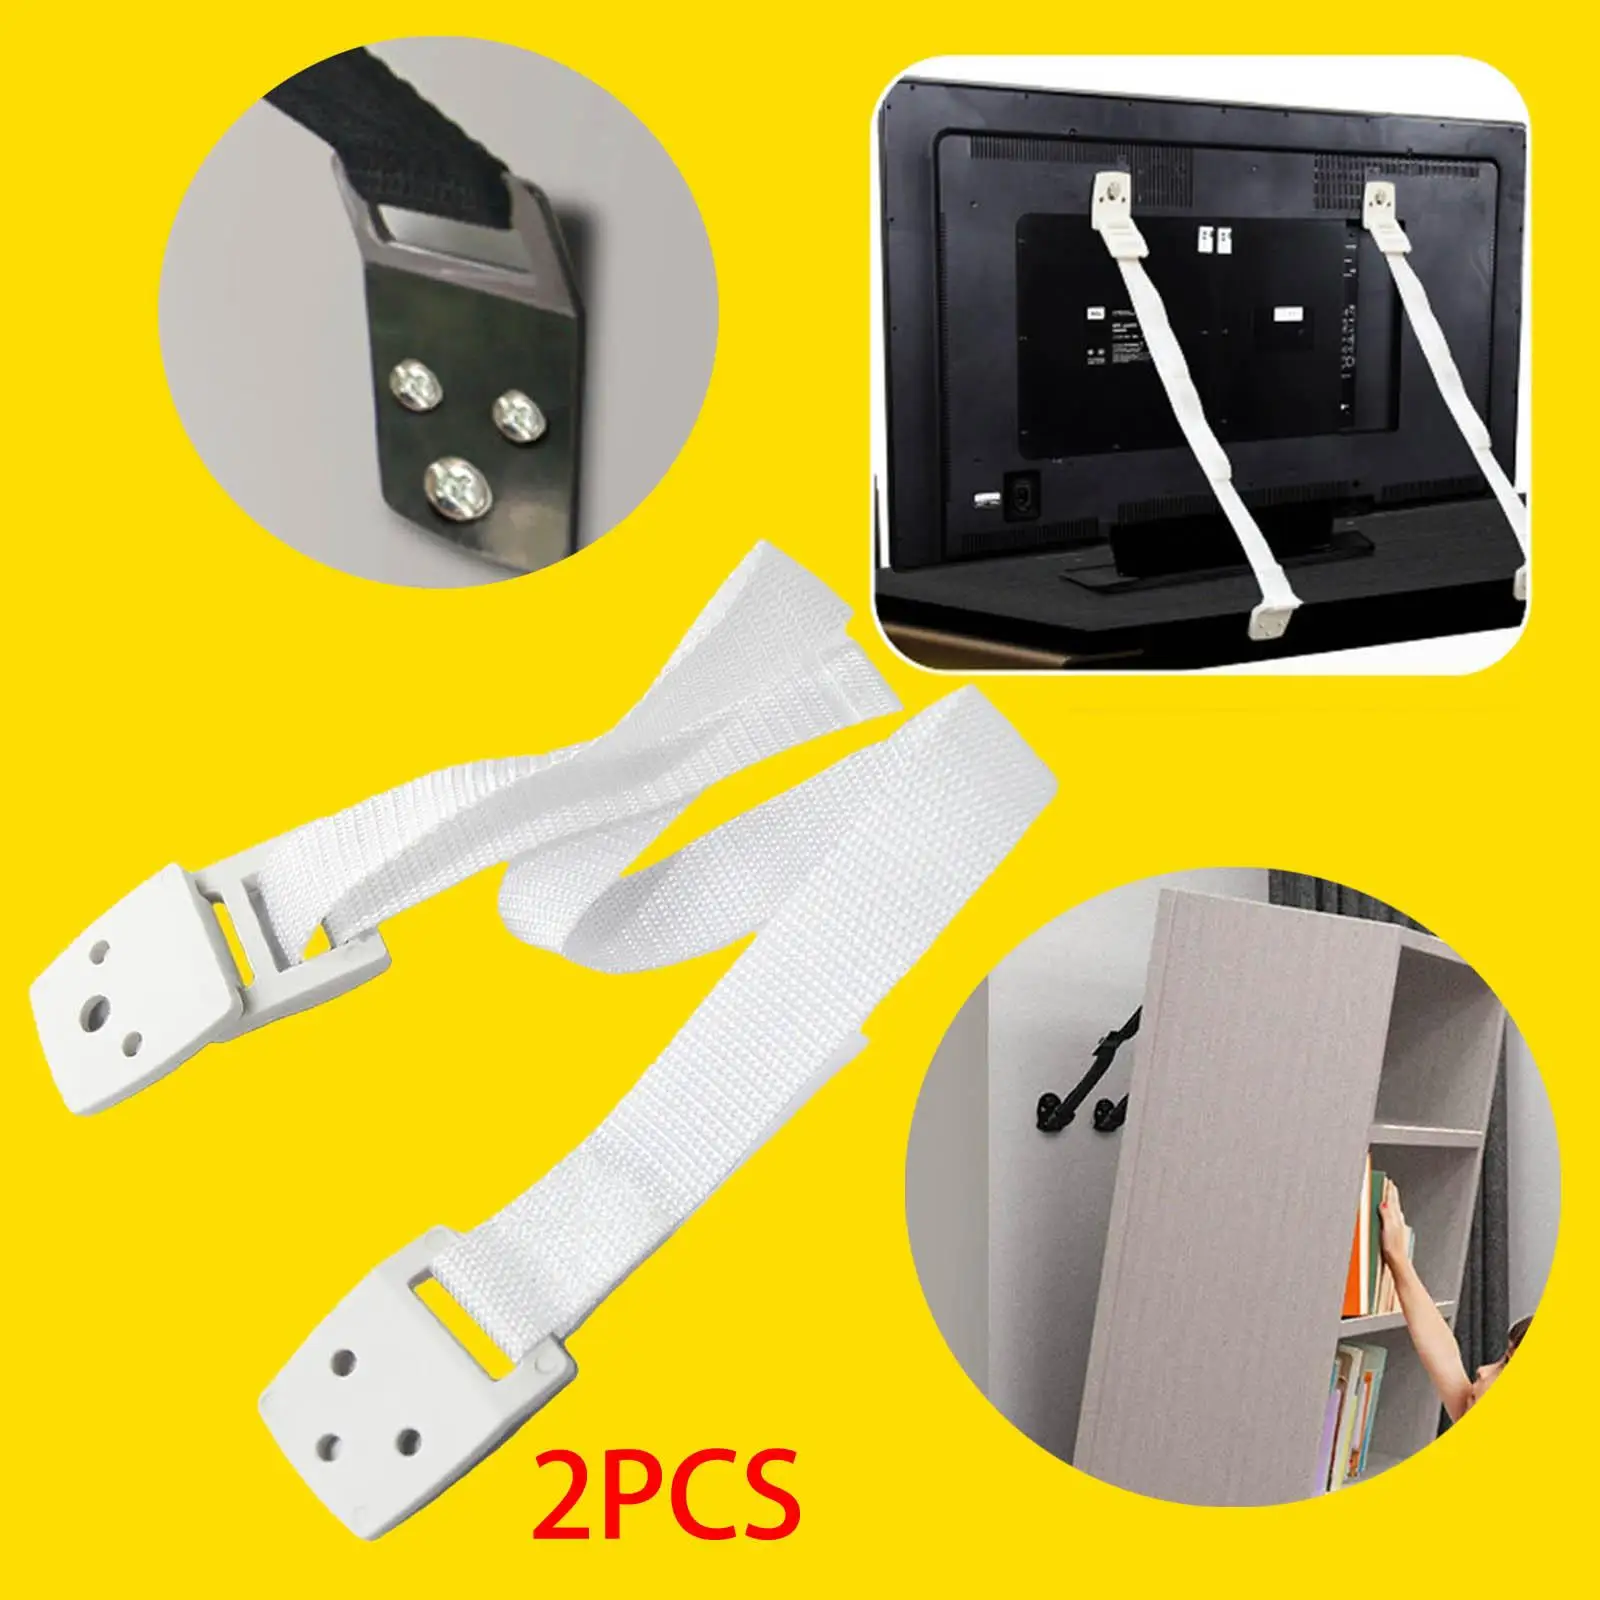 TV Anti Tip Straps Harness Holder for Children Kids Proofing Protection